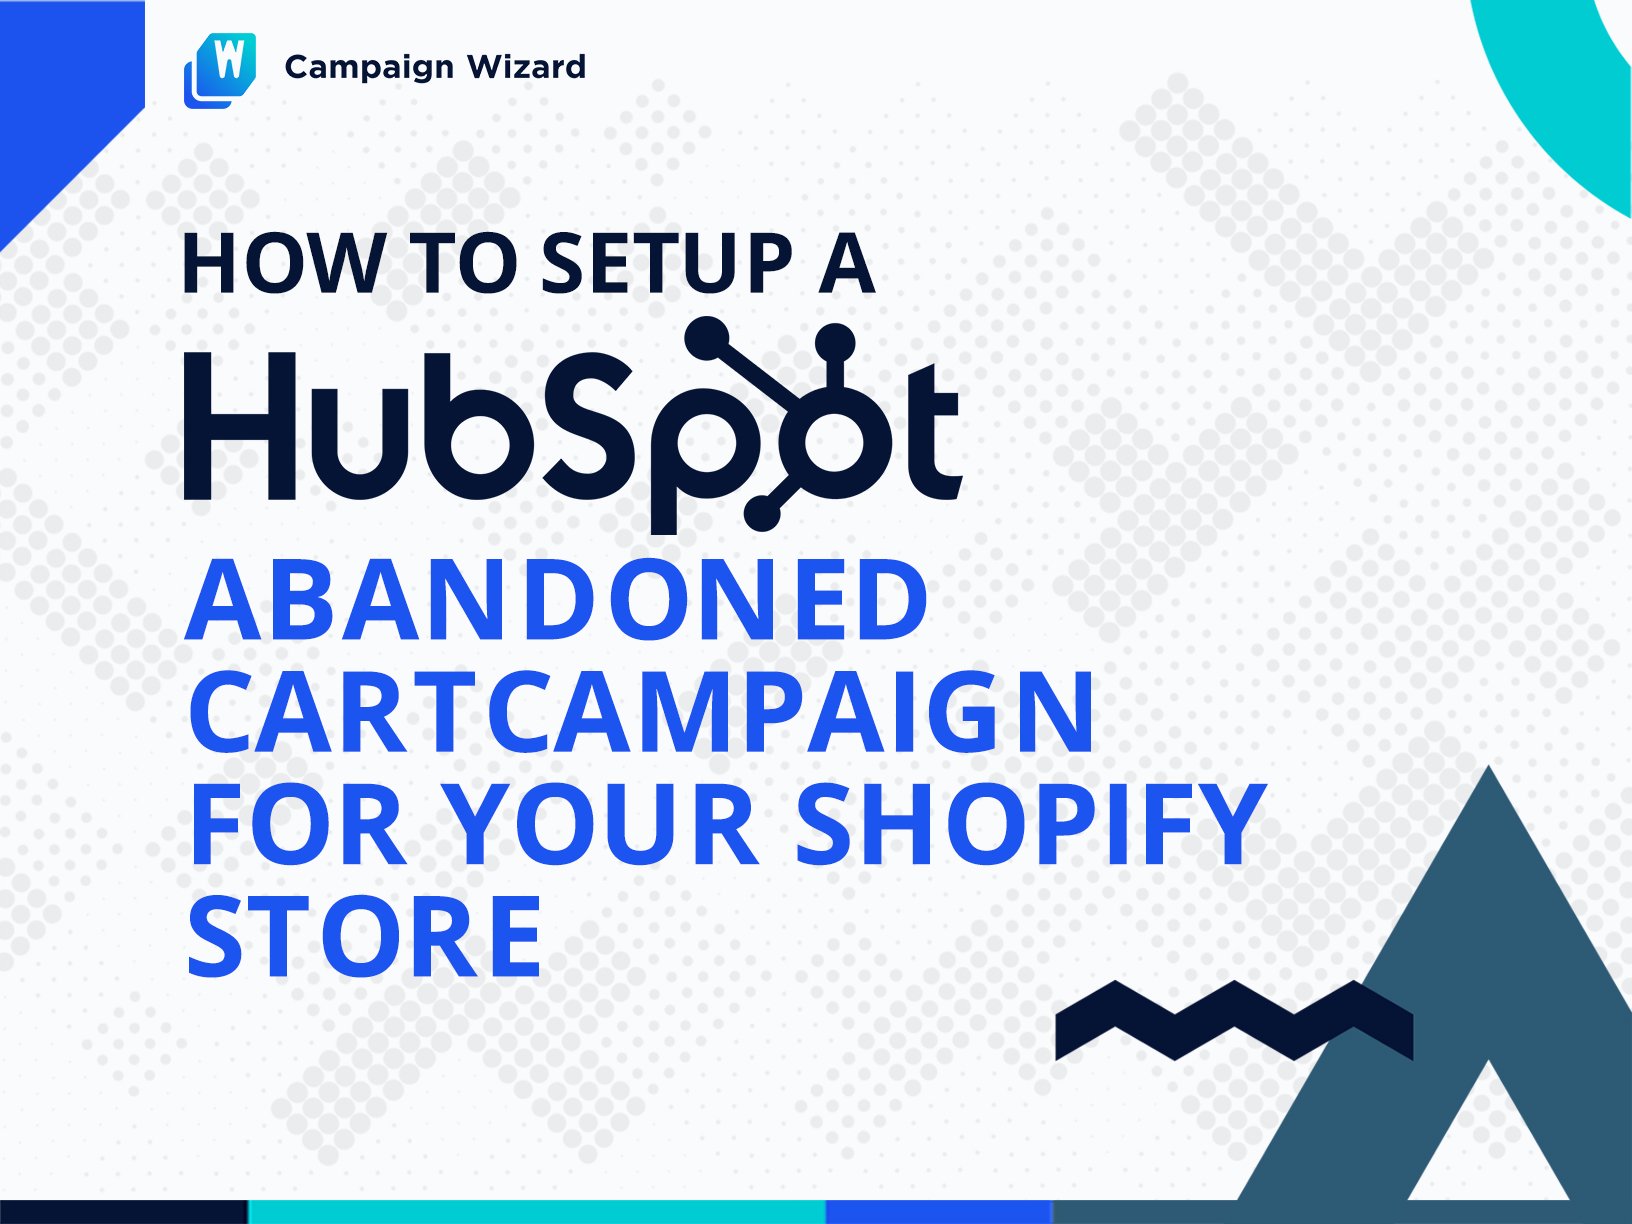 Shopify Stores That Launched on August 18, 2021